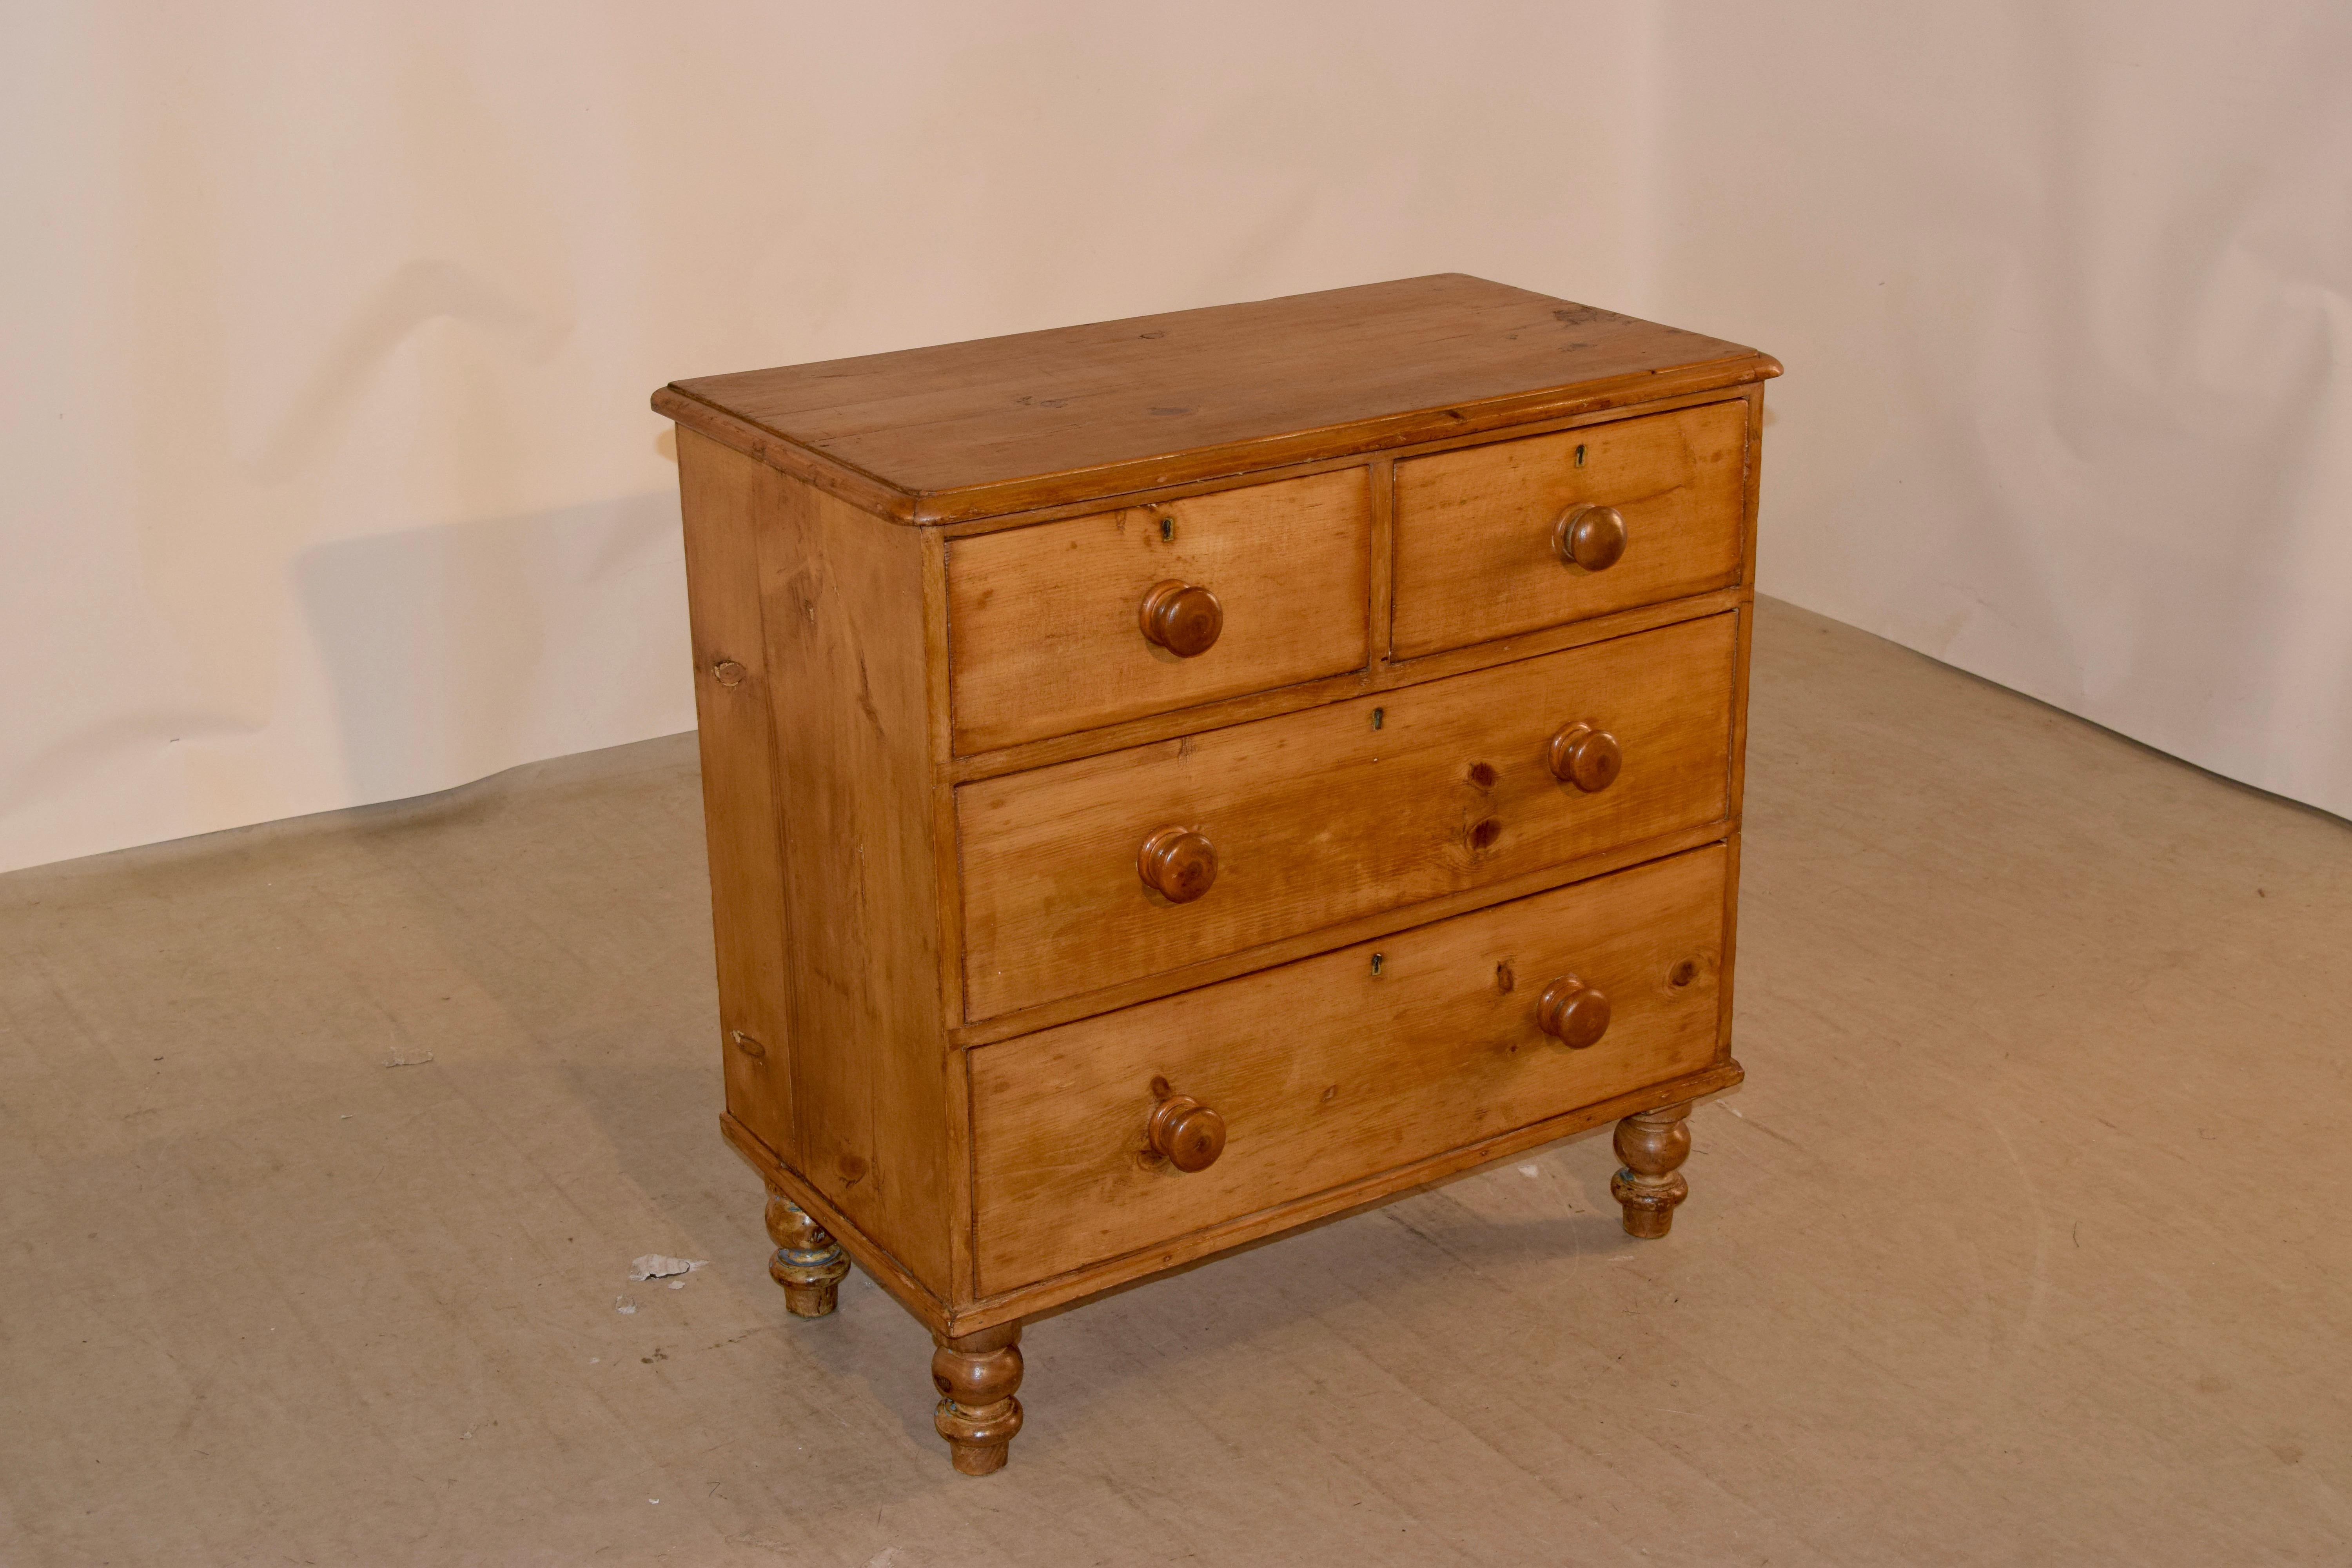 19th century pine chest of drawers from England with a beveled edge around the top, following down to two over two drawer configuration and simple sides. The case is supported on hand turned feet.